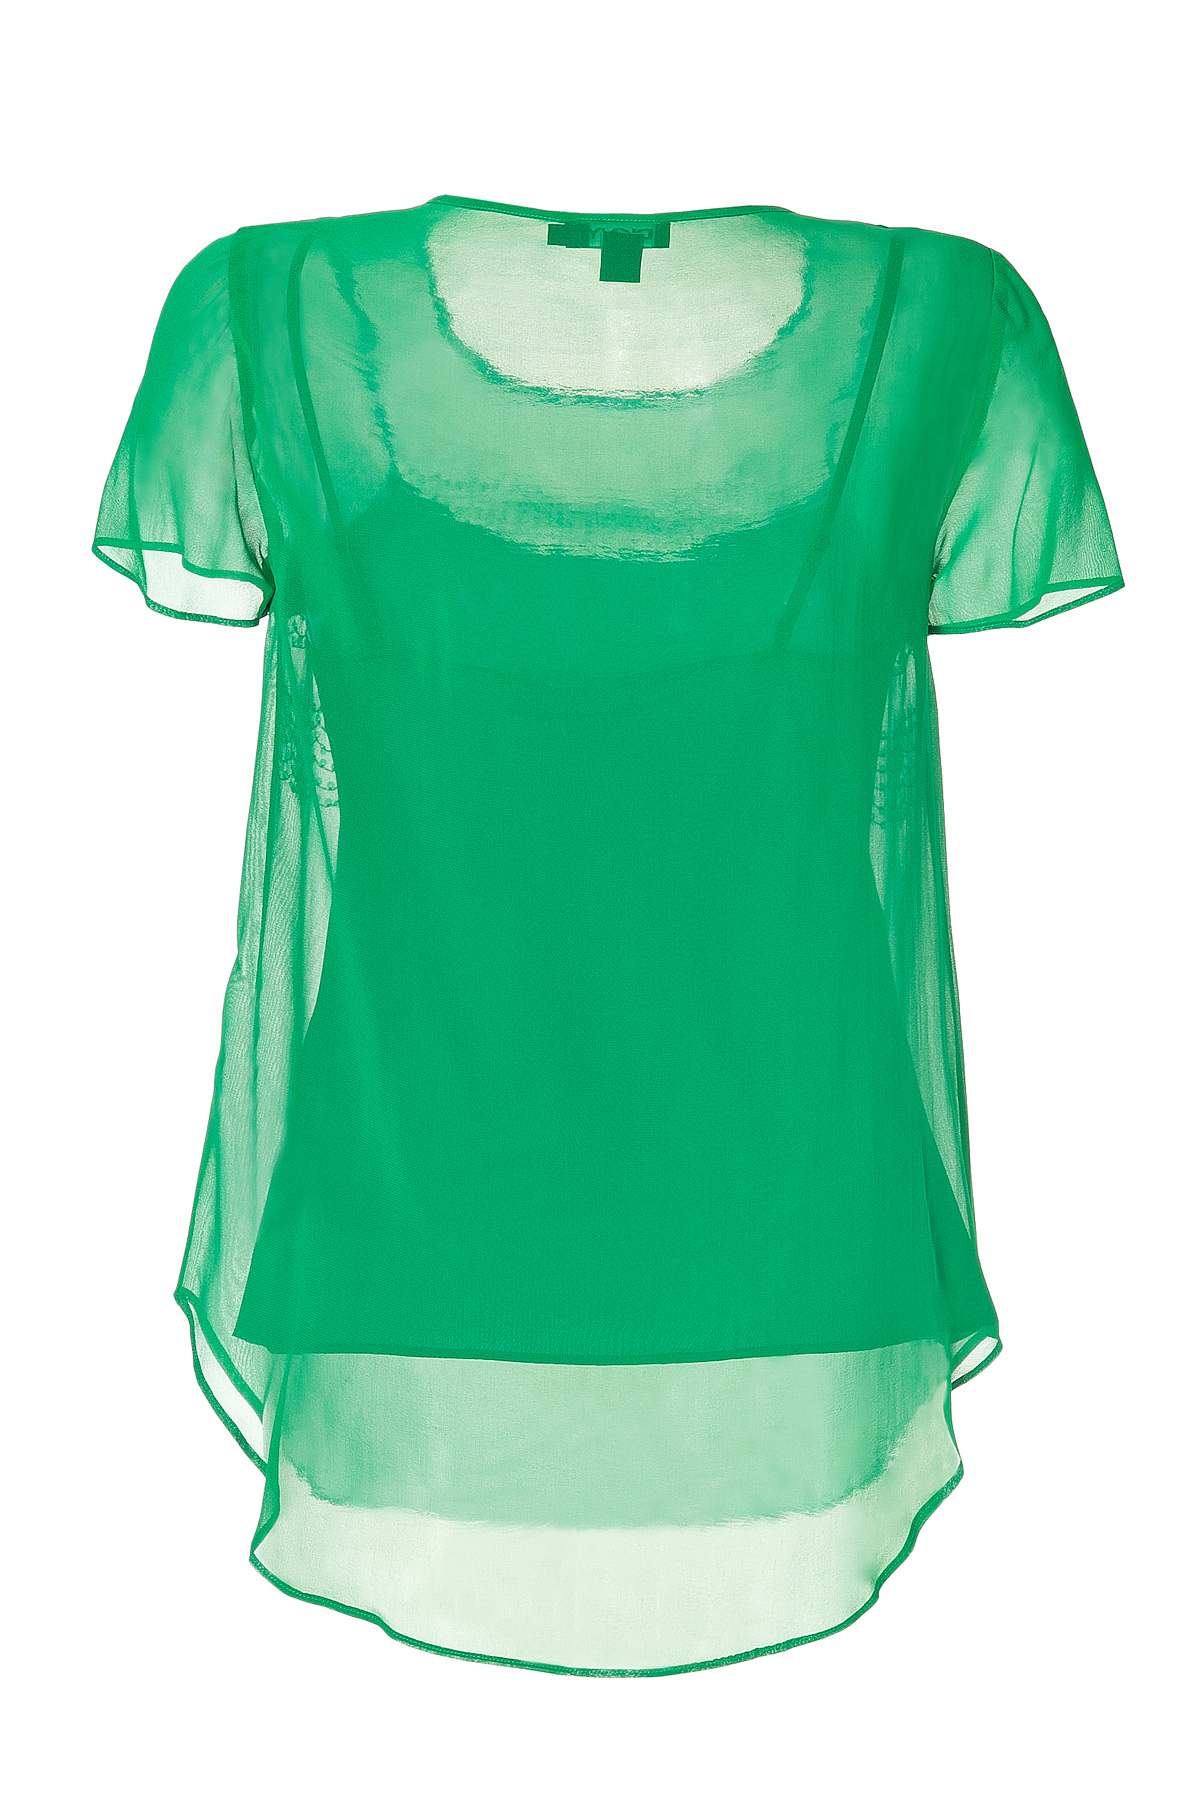 DKNY Silk Sequined Top In Vibrant Green in Green - Lyst